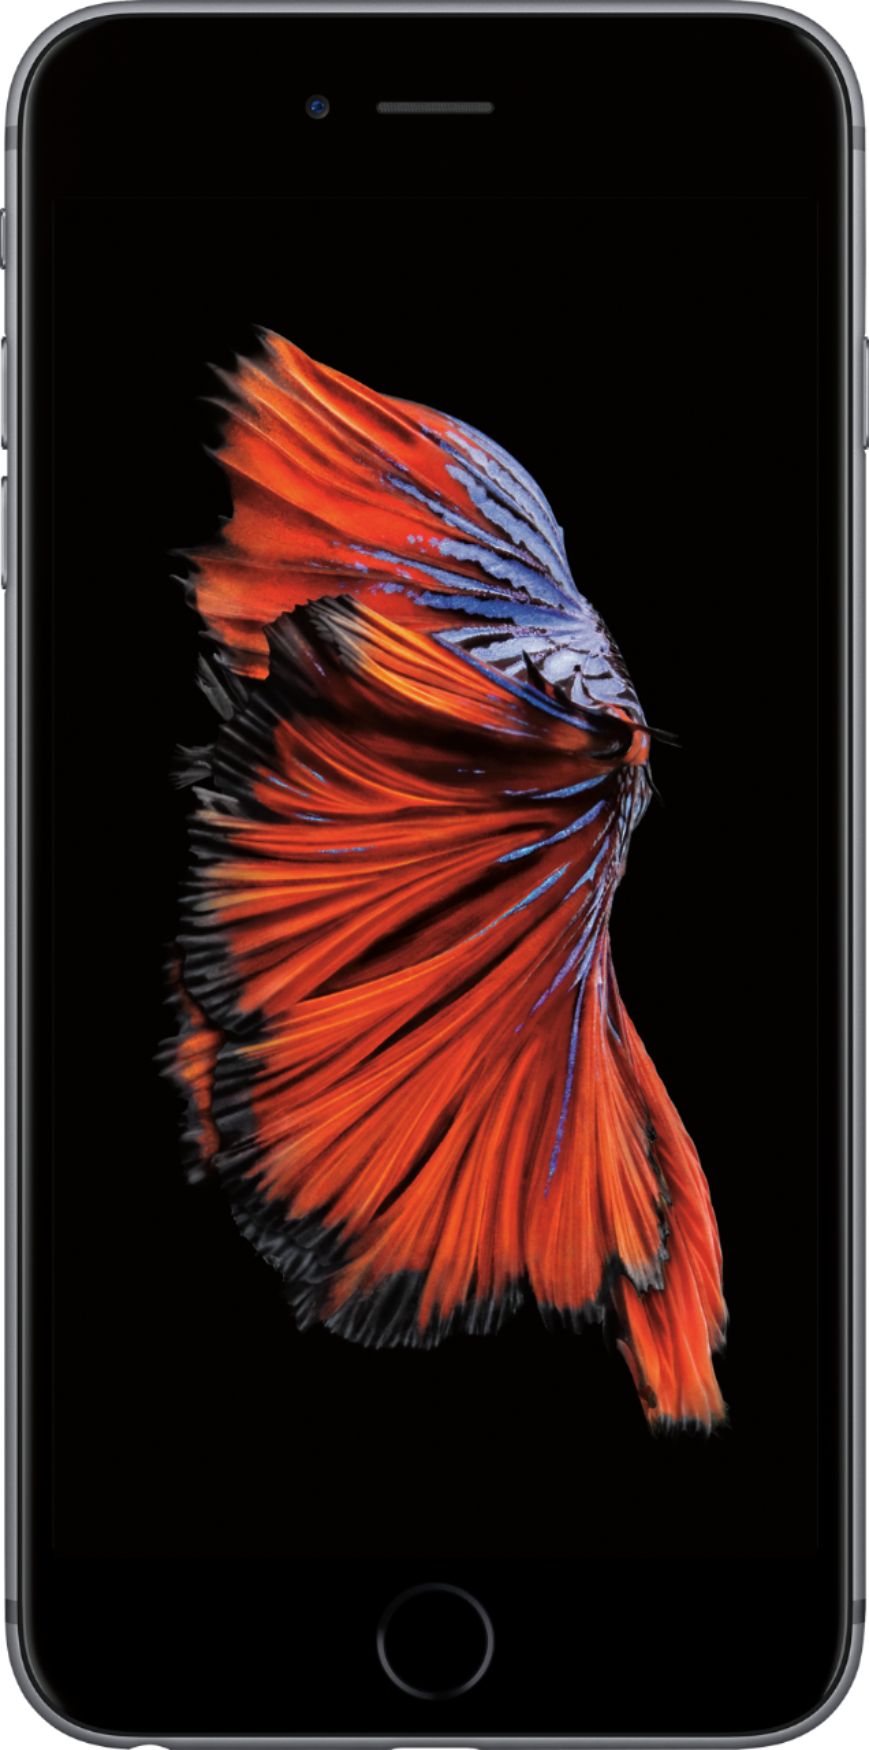 isolatie Afvoer Gemengd Best Buy: Apple iPhone 6s Plus 32GB Space Gray (Sprint) MN342LL/A